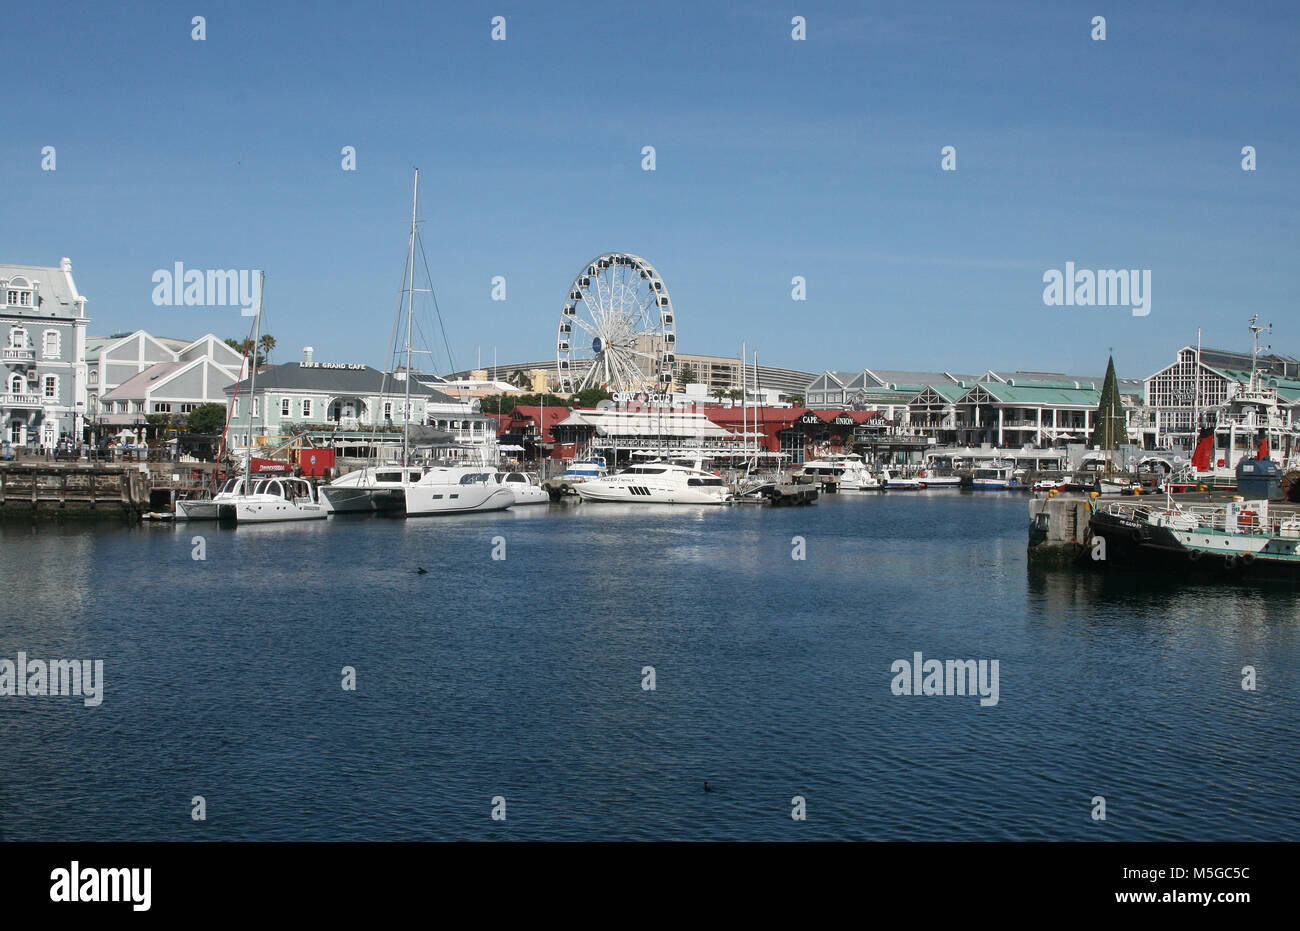 V&A Waterfront, (Victoria & Alfred Waterfront), Cape Town, South Africa Stock Photo